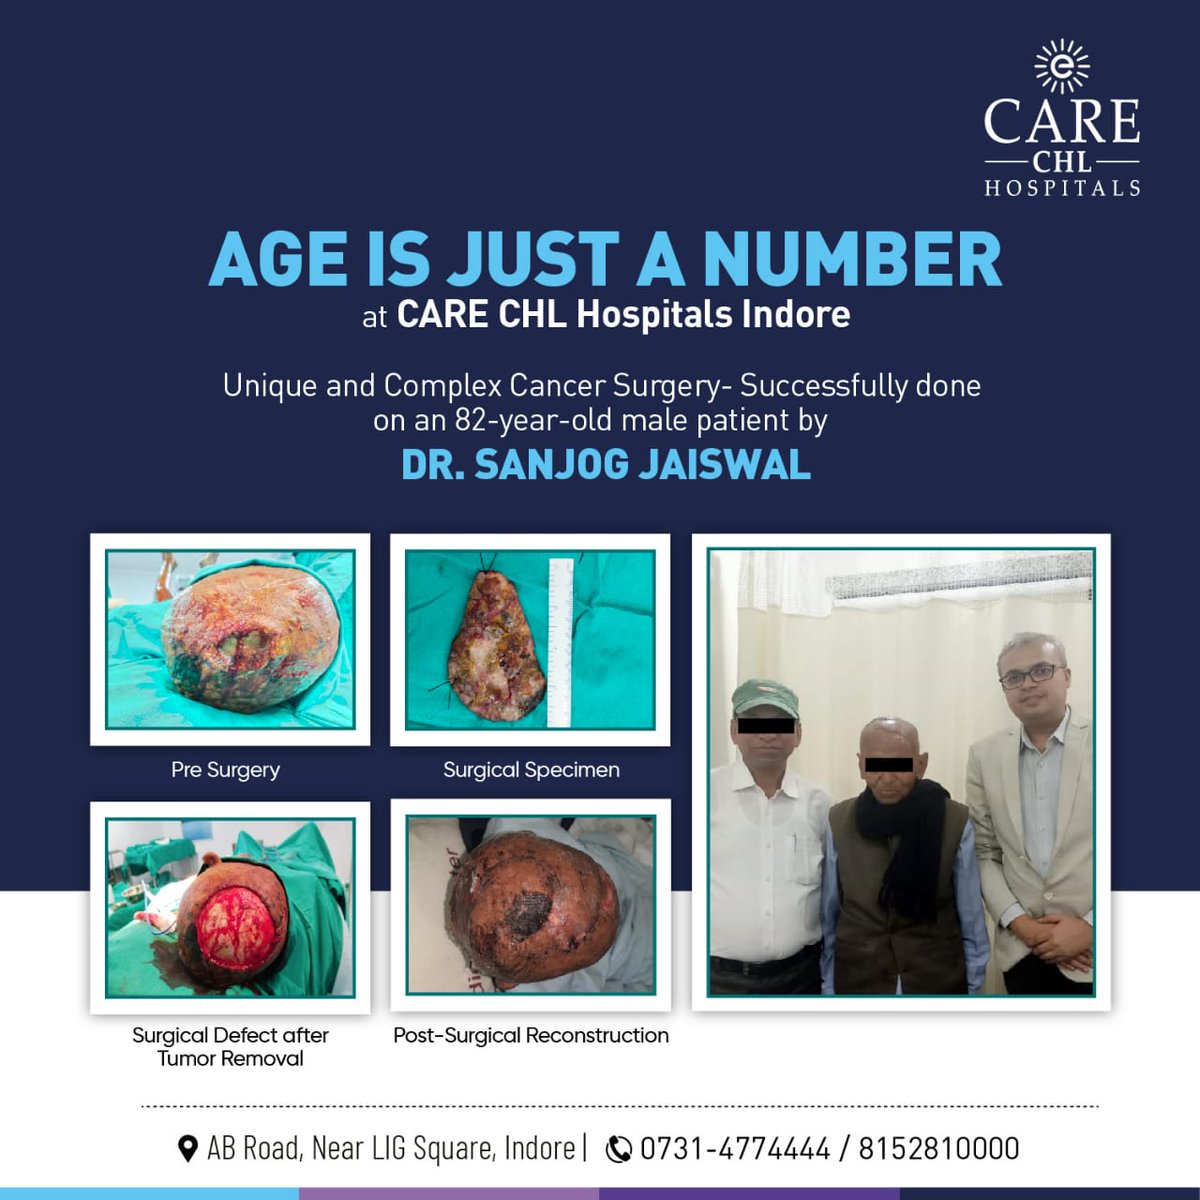 We are so happy to share that our esteemed Dr. Sanjog Jaiswal (Consultant Surgical Oncologist, Oncoplastic & Reconstructive Breast Surgeon) successfully performed a complex cancer surgery on an 82-year-old male patient with Rare Scalp Cancer.

#carechlhospitals #carehospitals